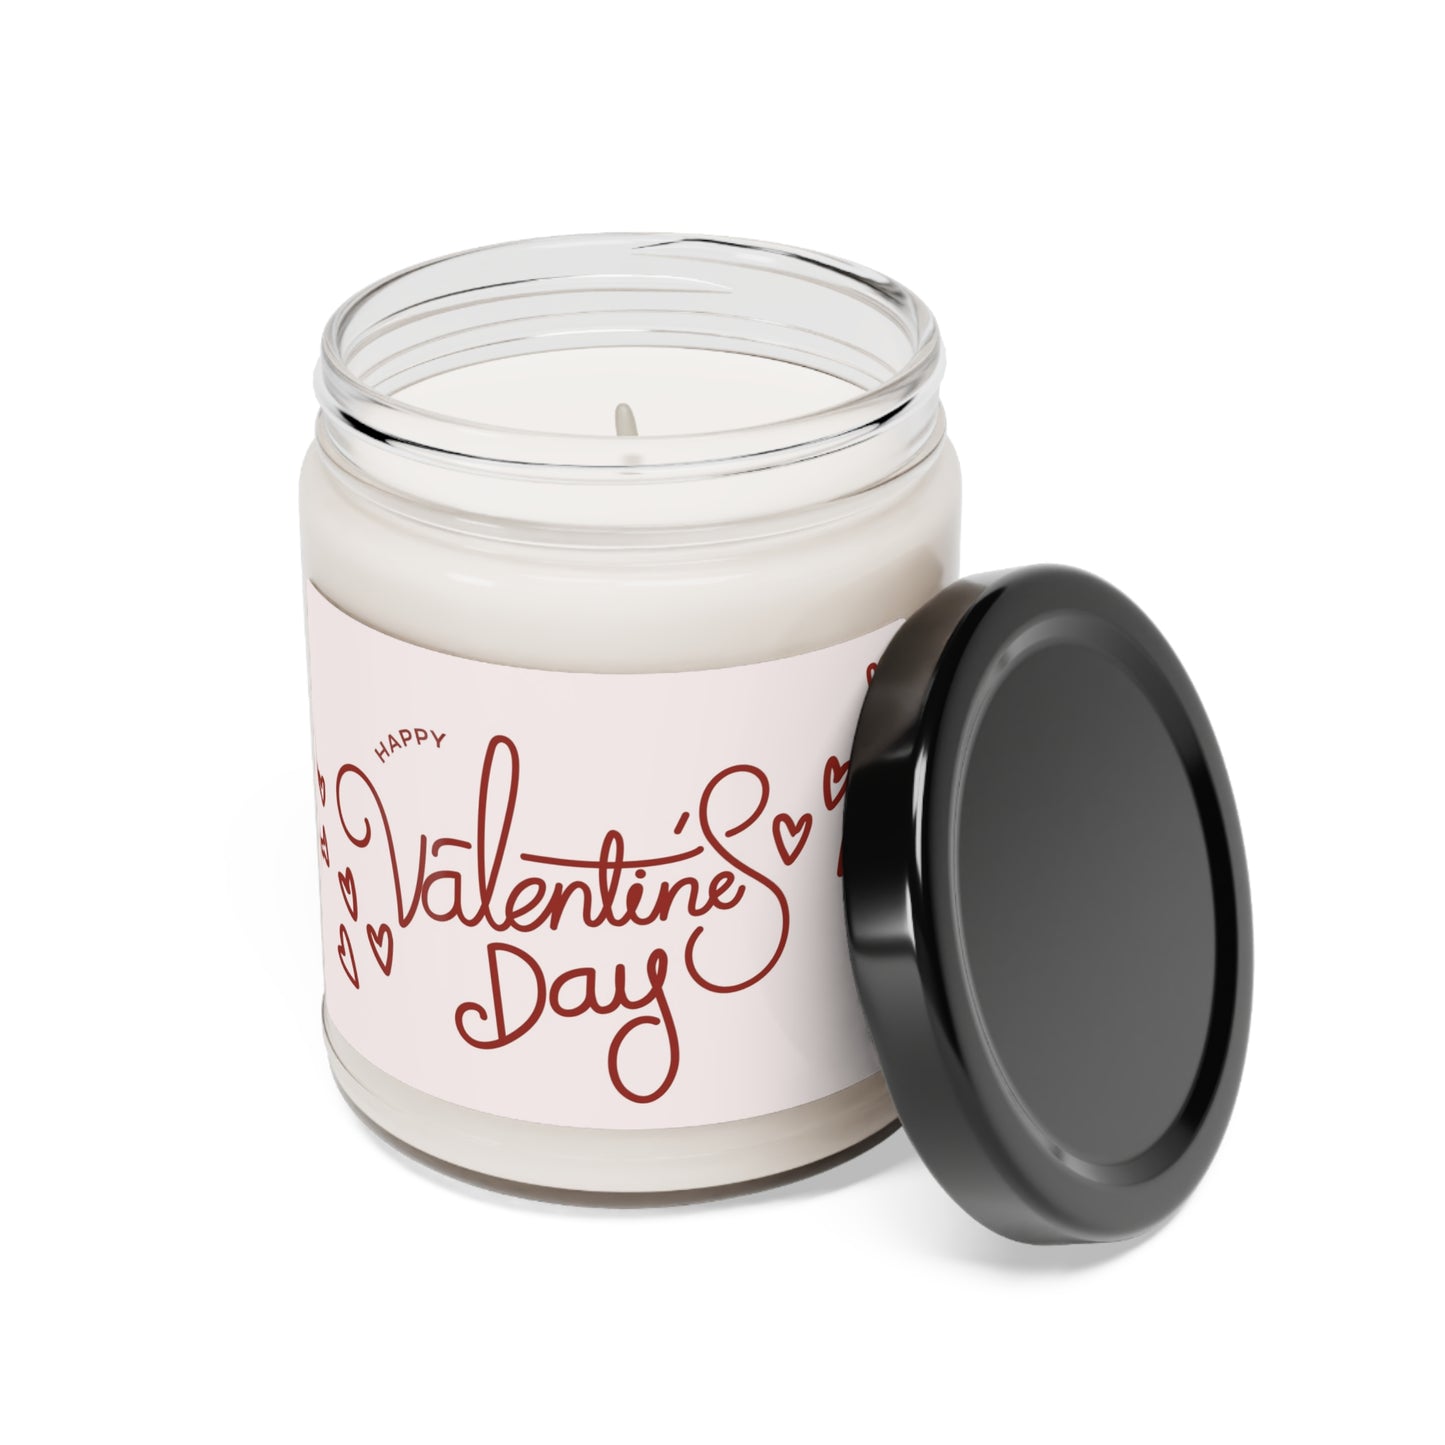 "Happy Valentine's Day" Scented Soy Candle, 9oz, Glossy Label, 5 different aromatic scents